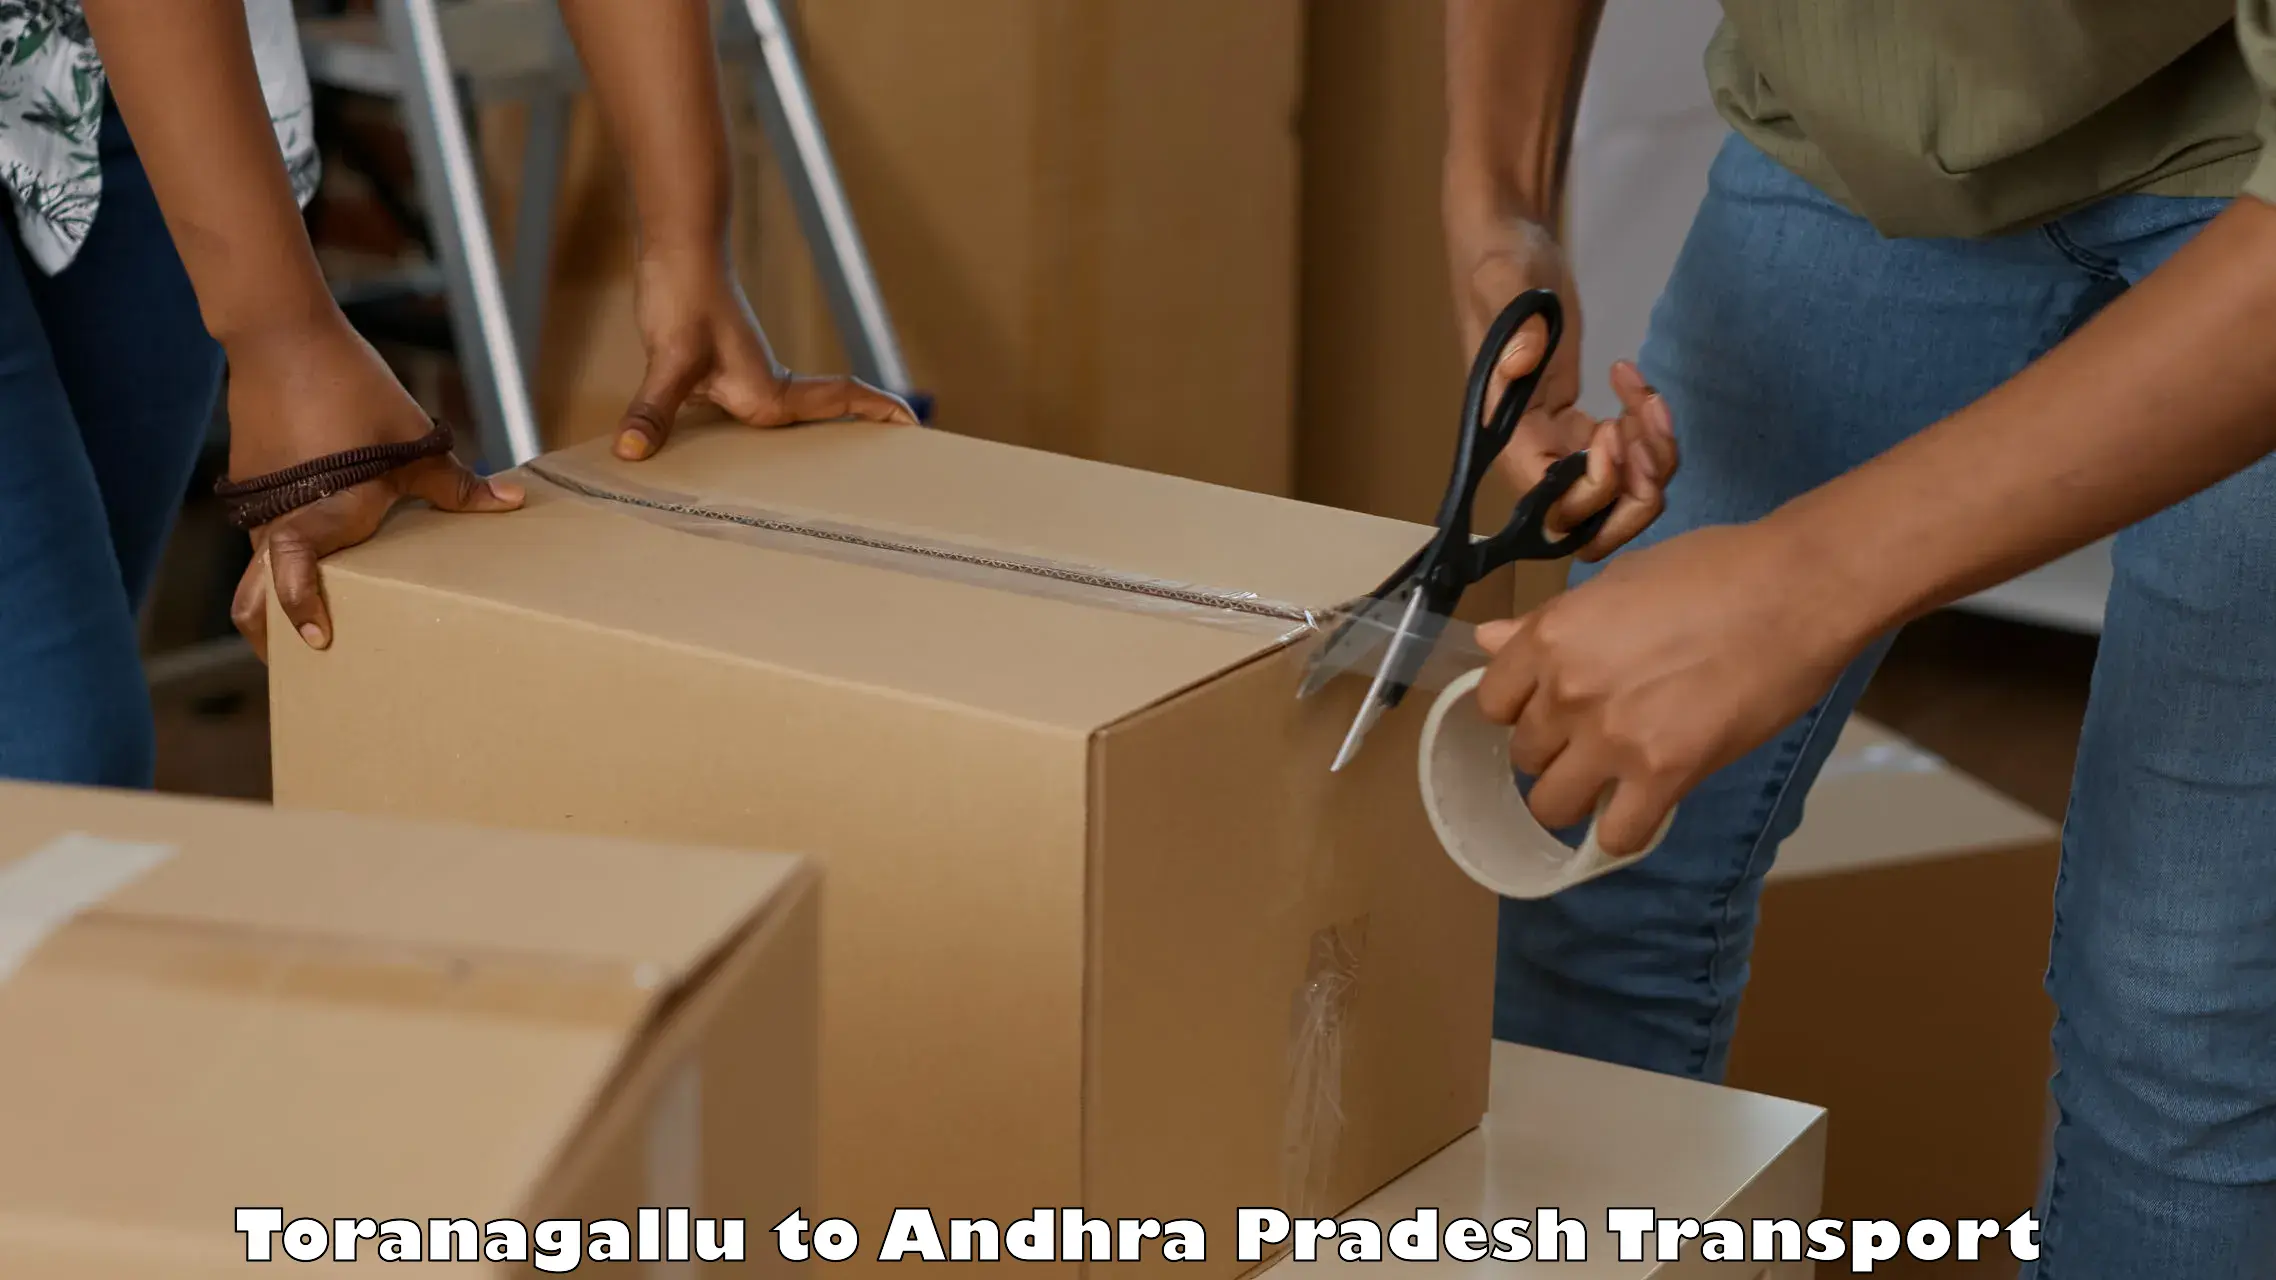 Package delivery services Toranagallu to Yellamanchili